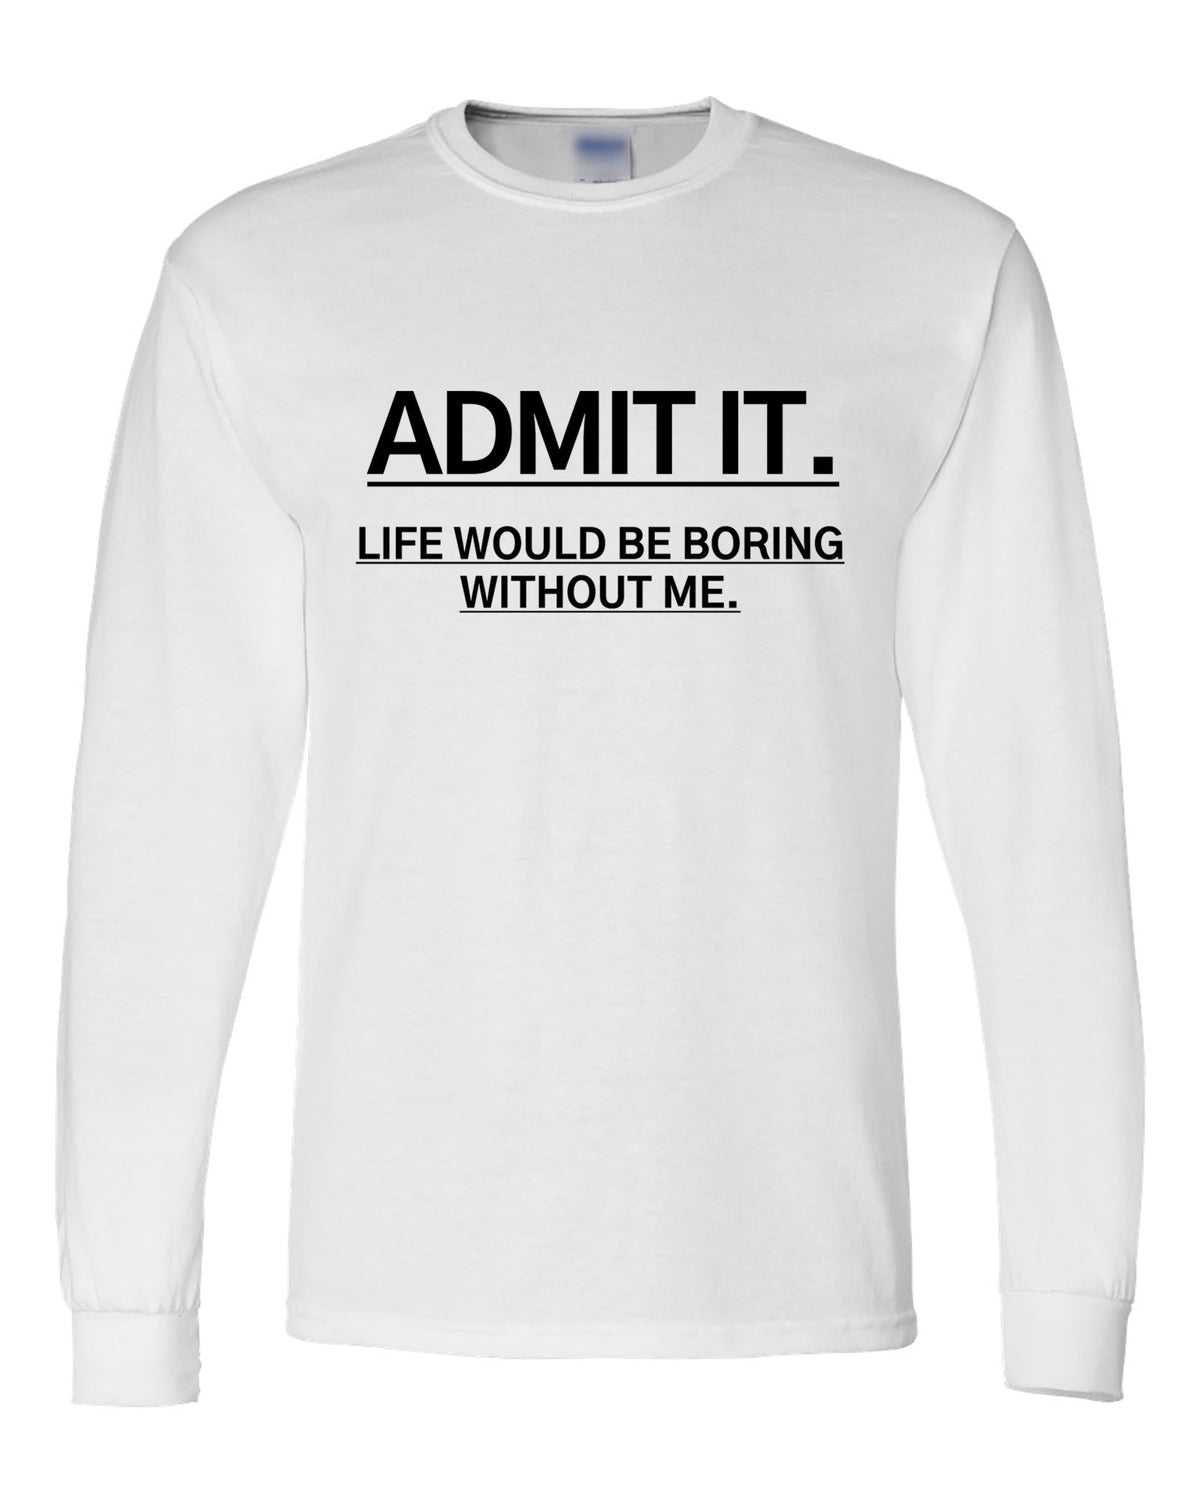 Admit It Funny Sarcastic Humor New Long Sleeve Shirt